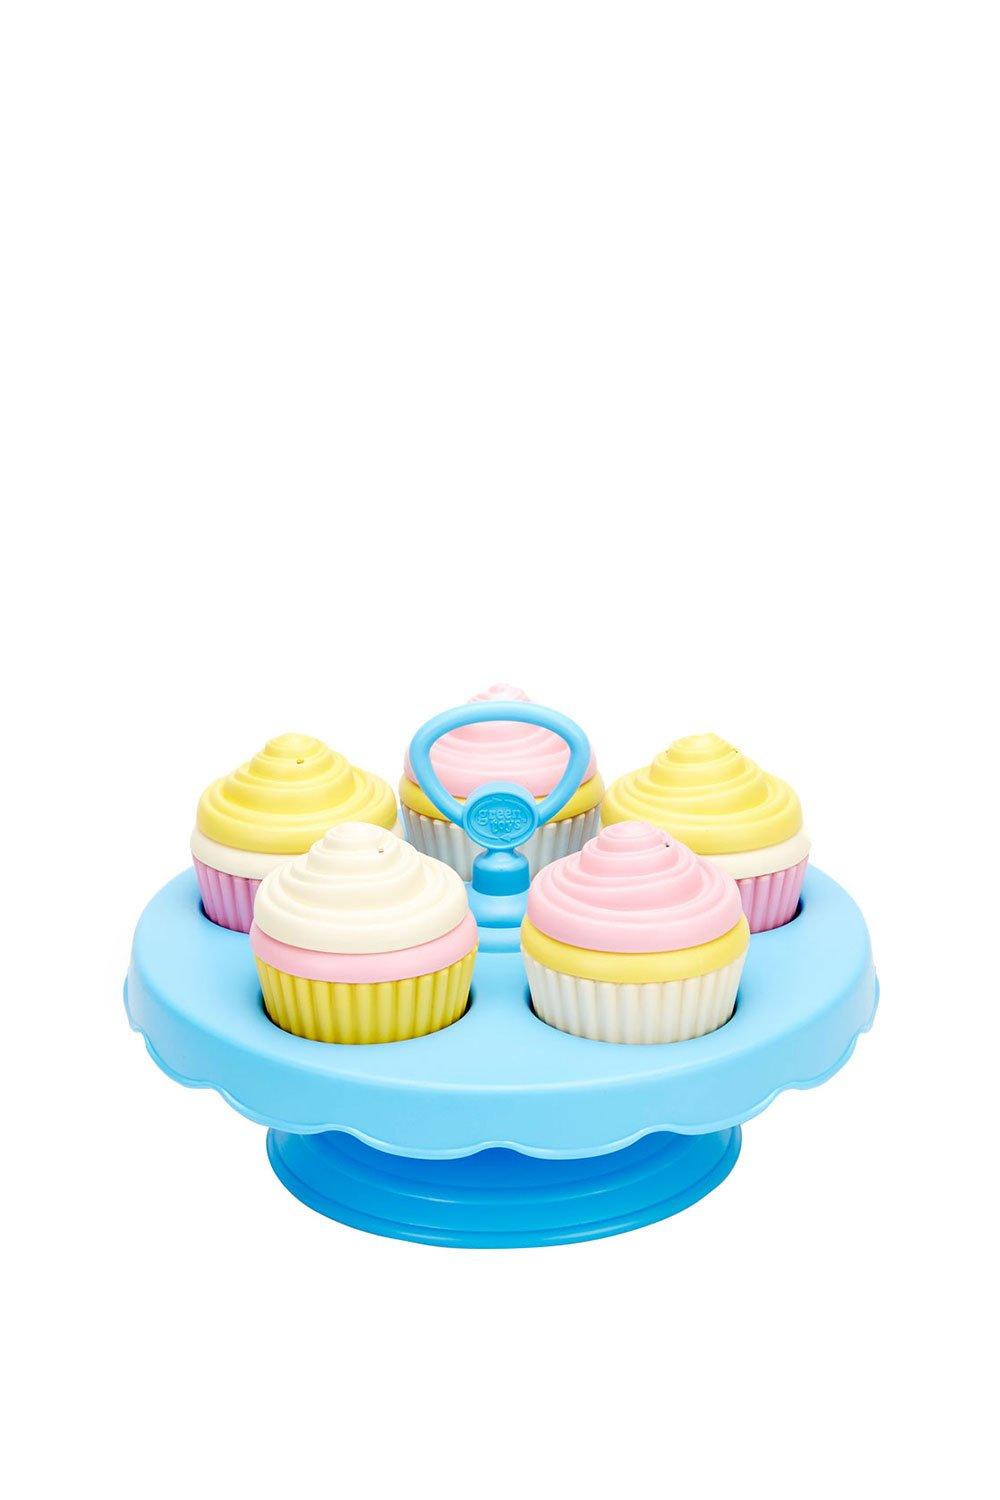 Green Toys Toy Cupcakes|baby blue